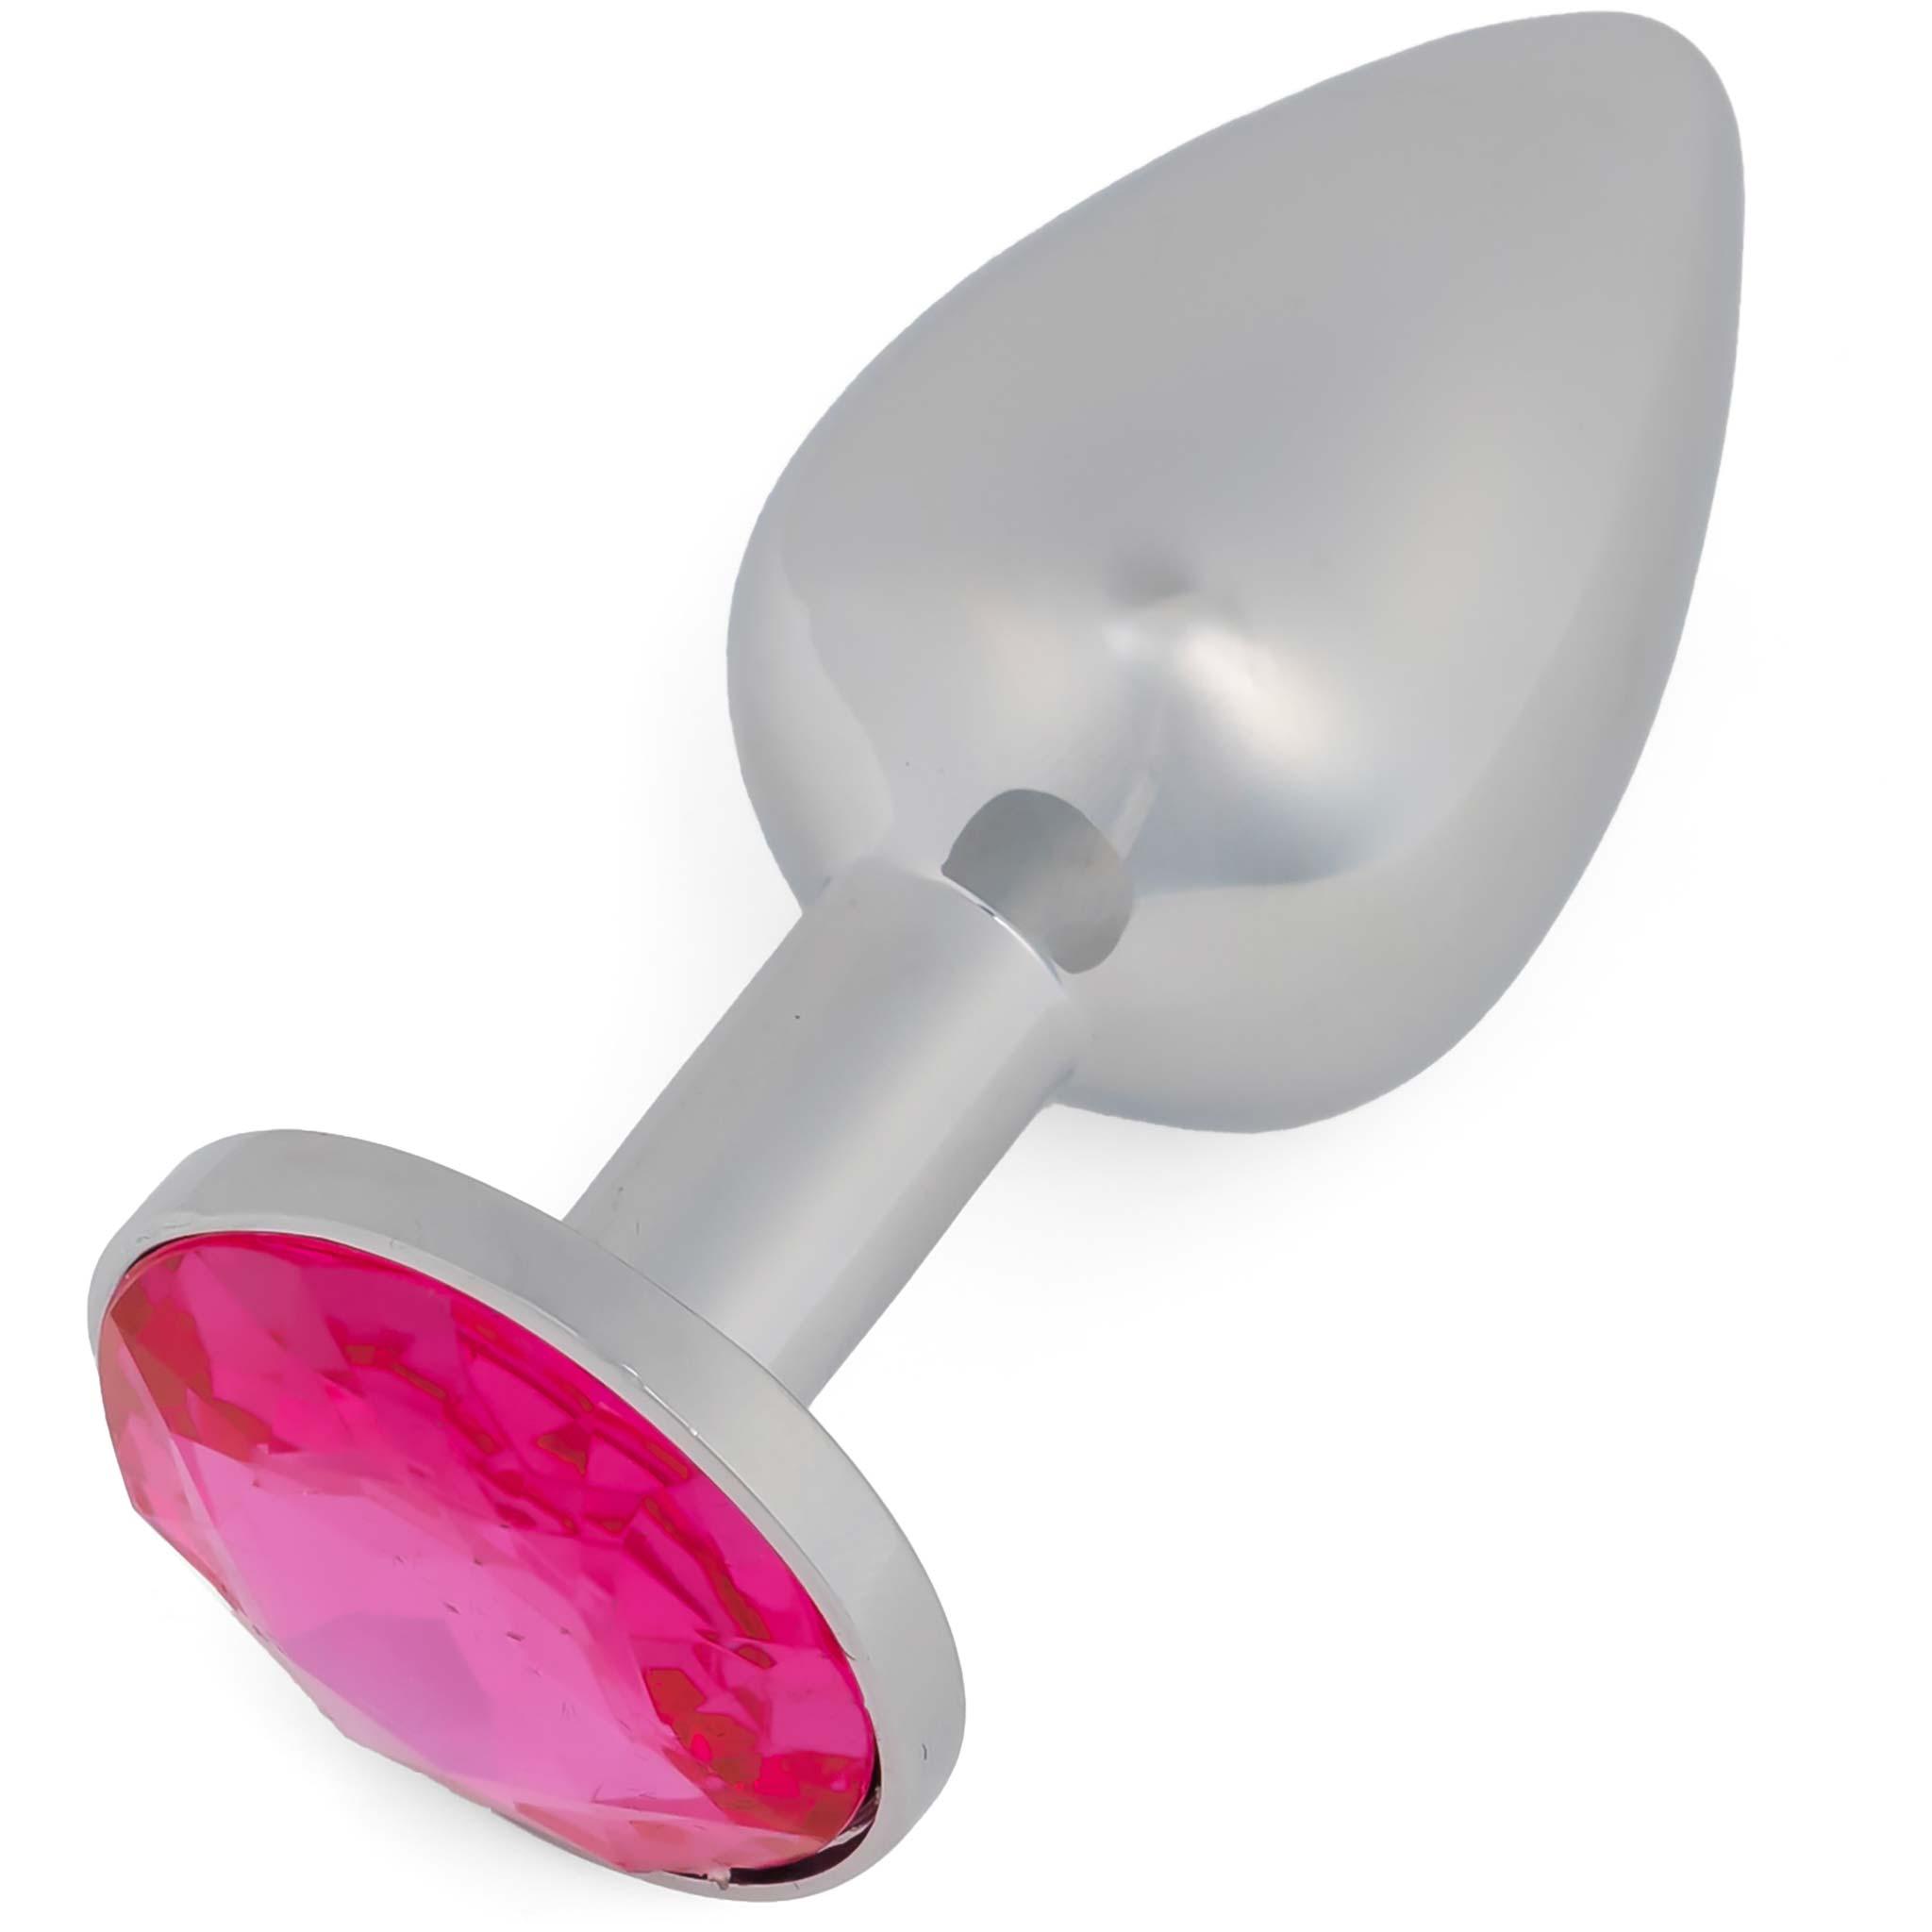 Anal Plug, Metal with a Pink Stone, 5 cm